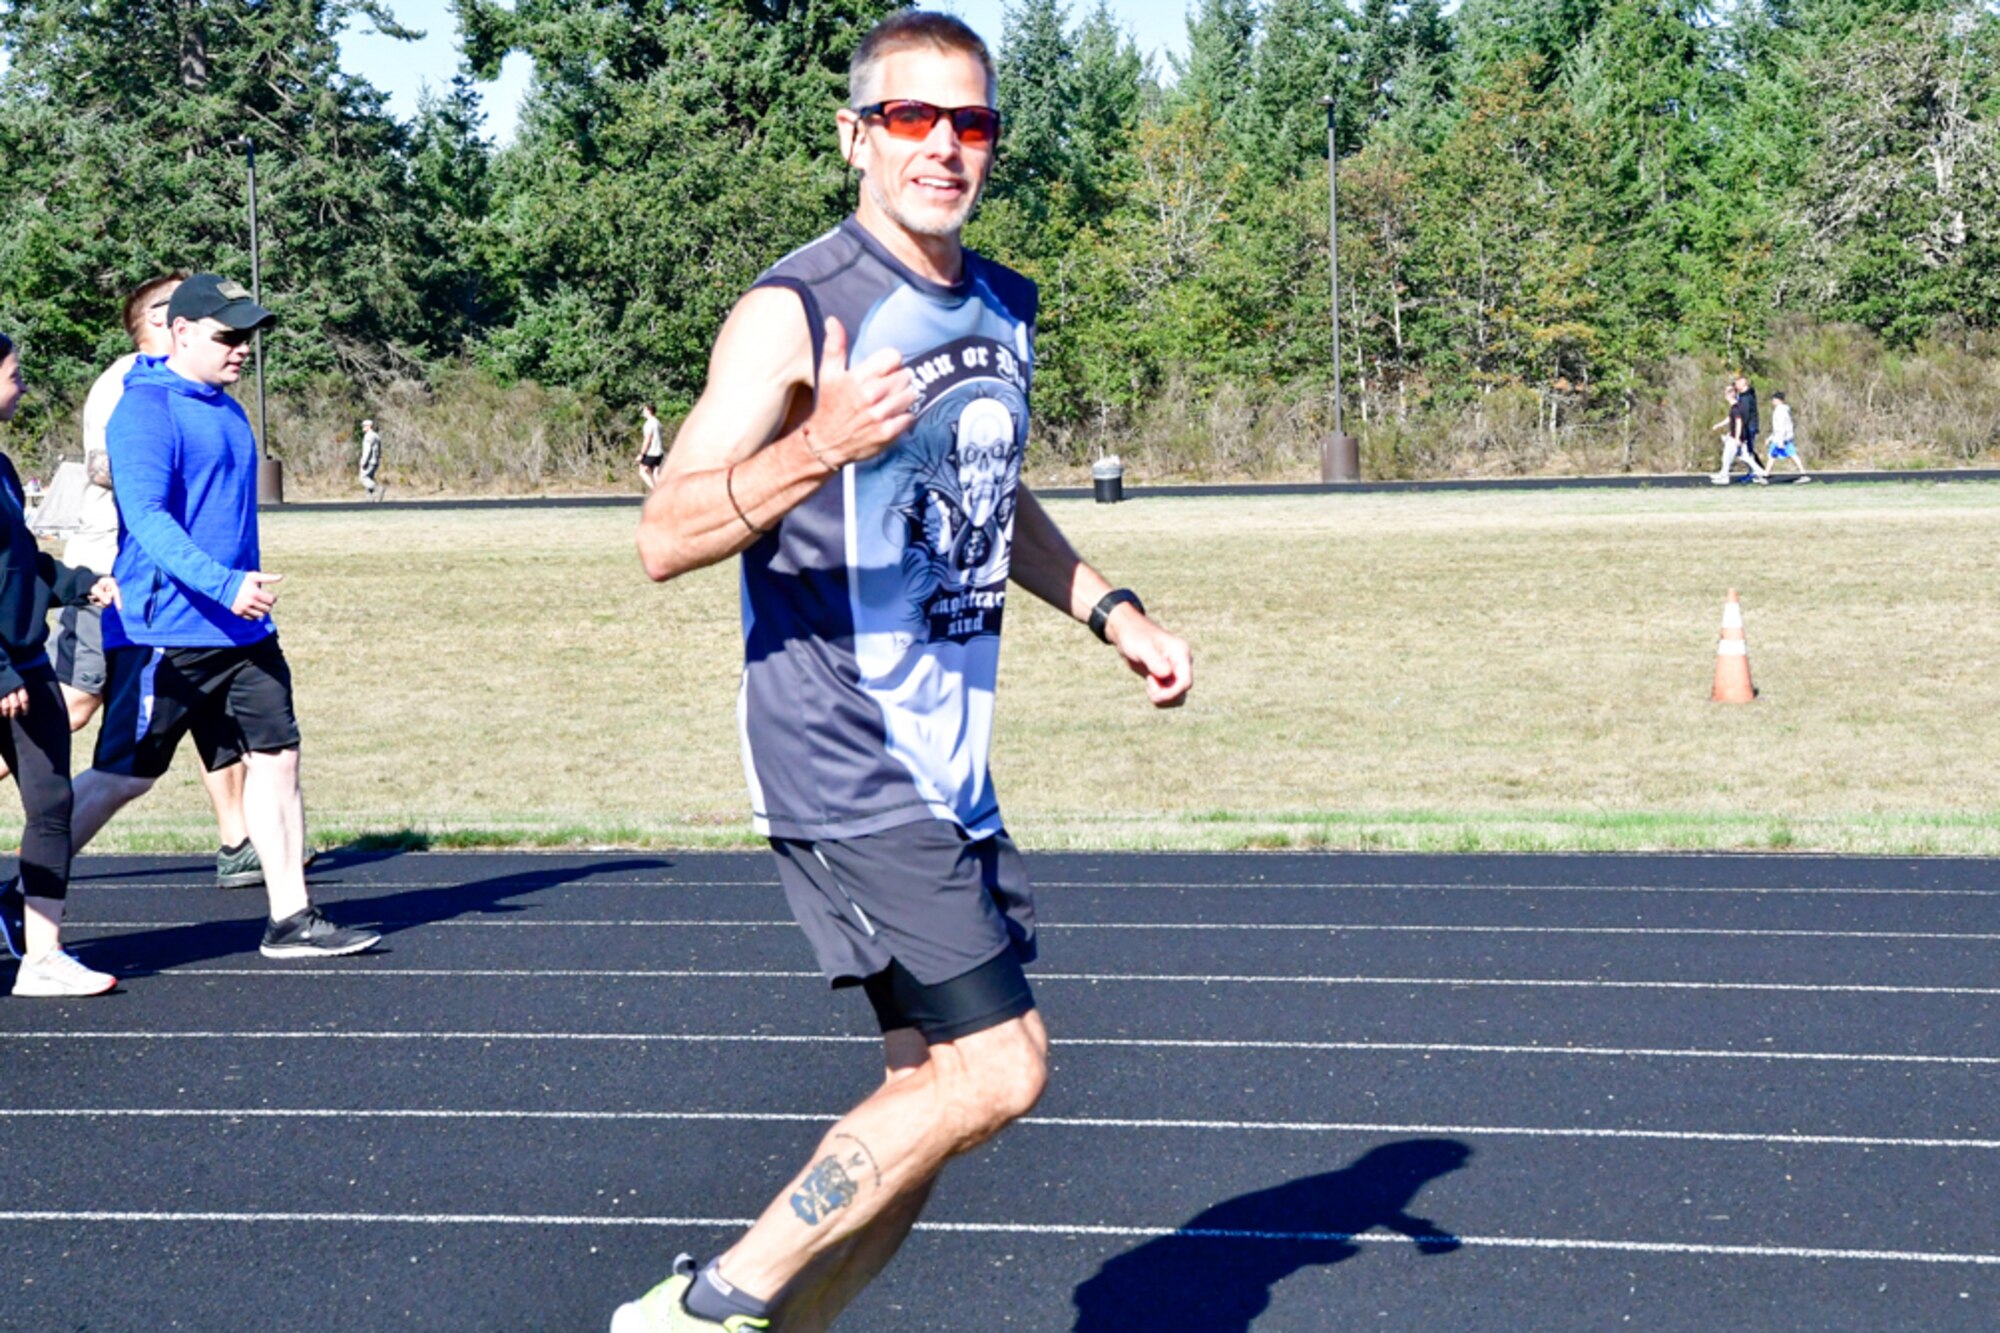 Bruce Robie, 225th Support Squadron National Airspace System Defense program manager, shows his enthusiasm for hitting mile 71 during the Joint Base Lewis-McChord 24-Hour POW/MIA Remembrance Run Sept. 19, 2018. Robie finished second in the individual standings with 74 miles. (U.S. Air National Guard photo by Maj. Kimberly Burke)